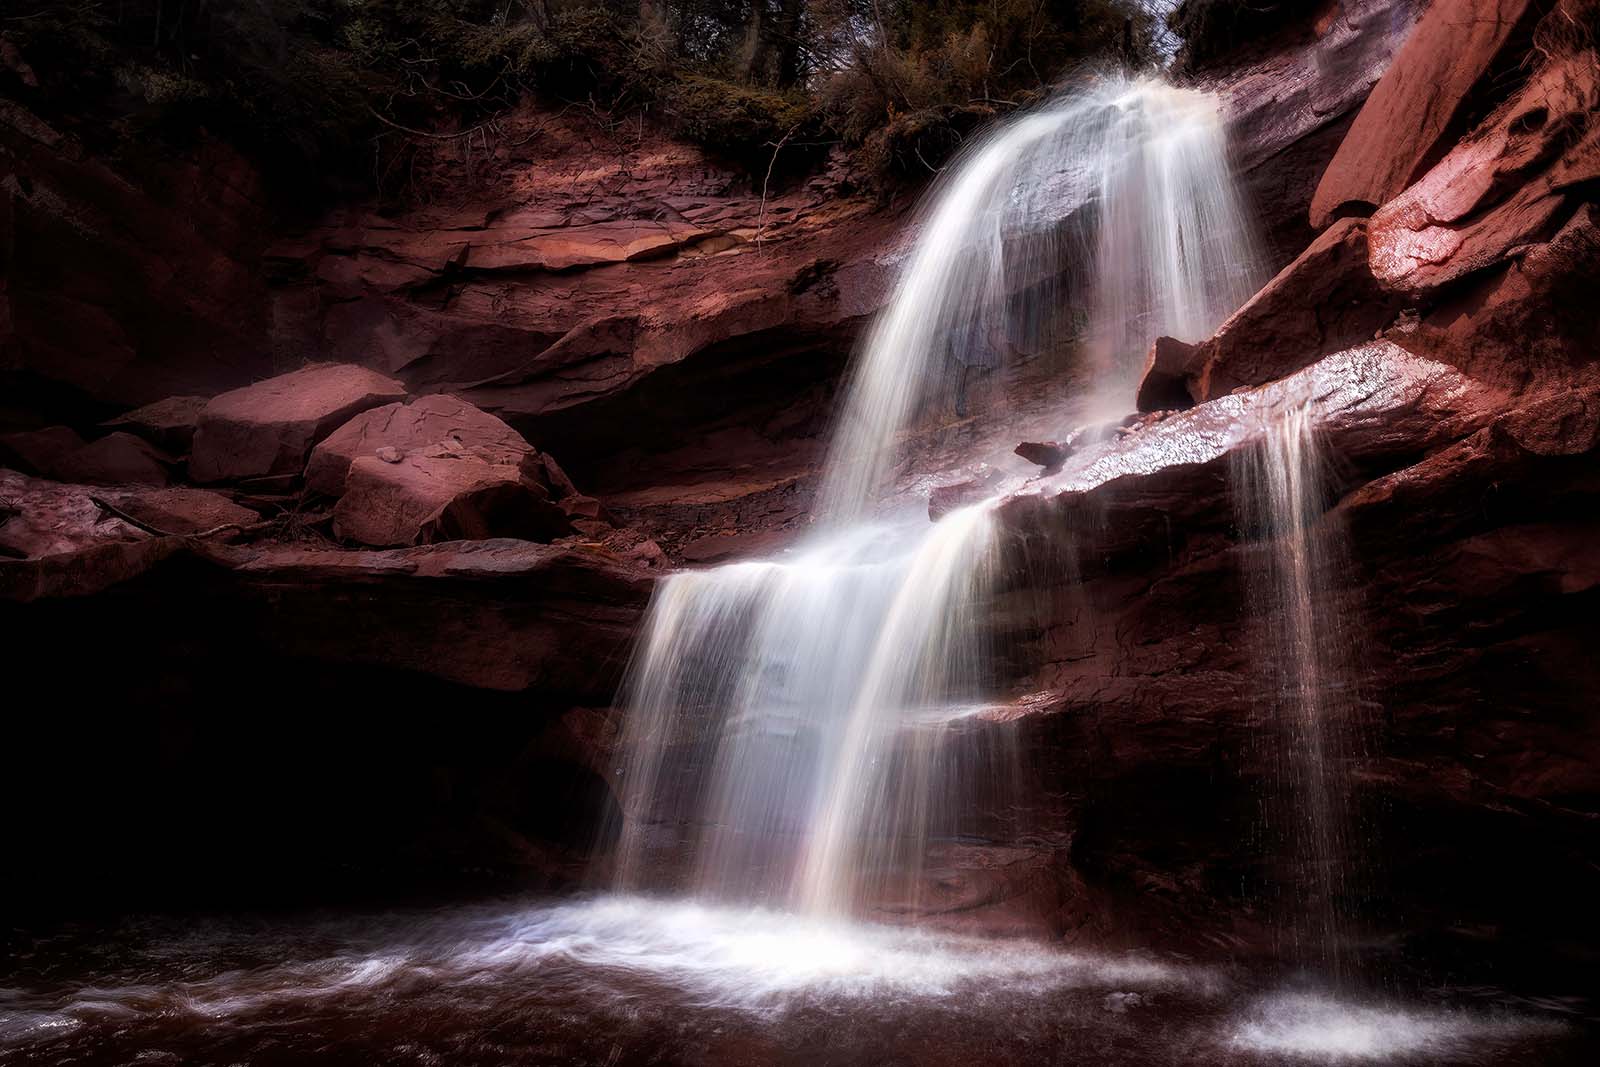 spring snowmelt runoff waterfall in the apostle islands national lakeshore on lake superior wisconsin